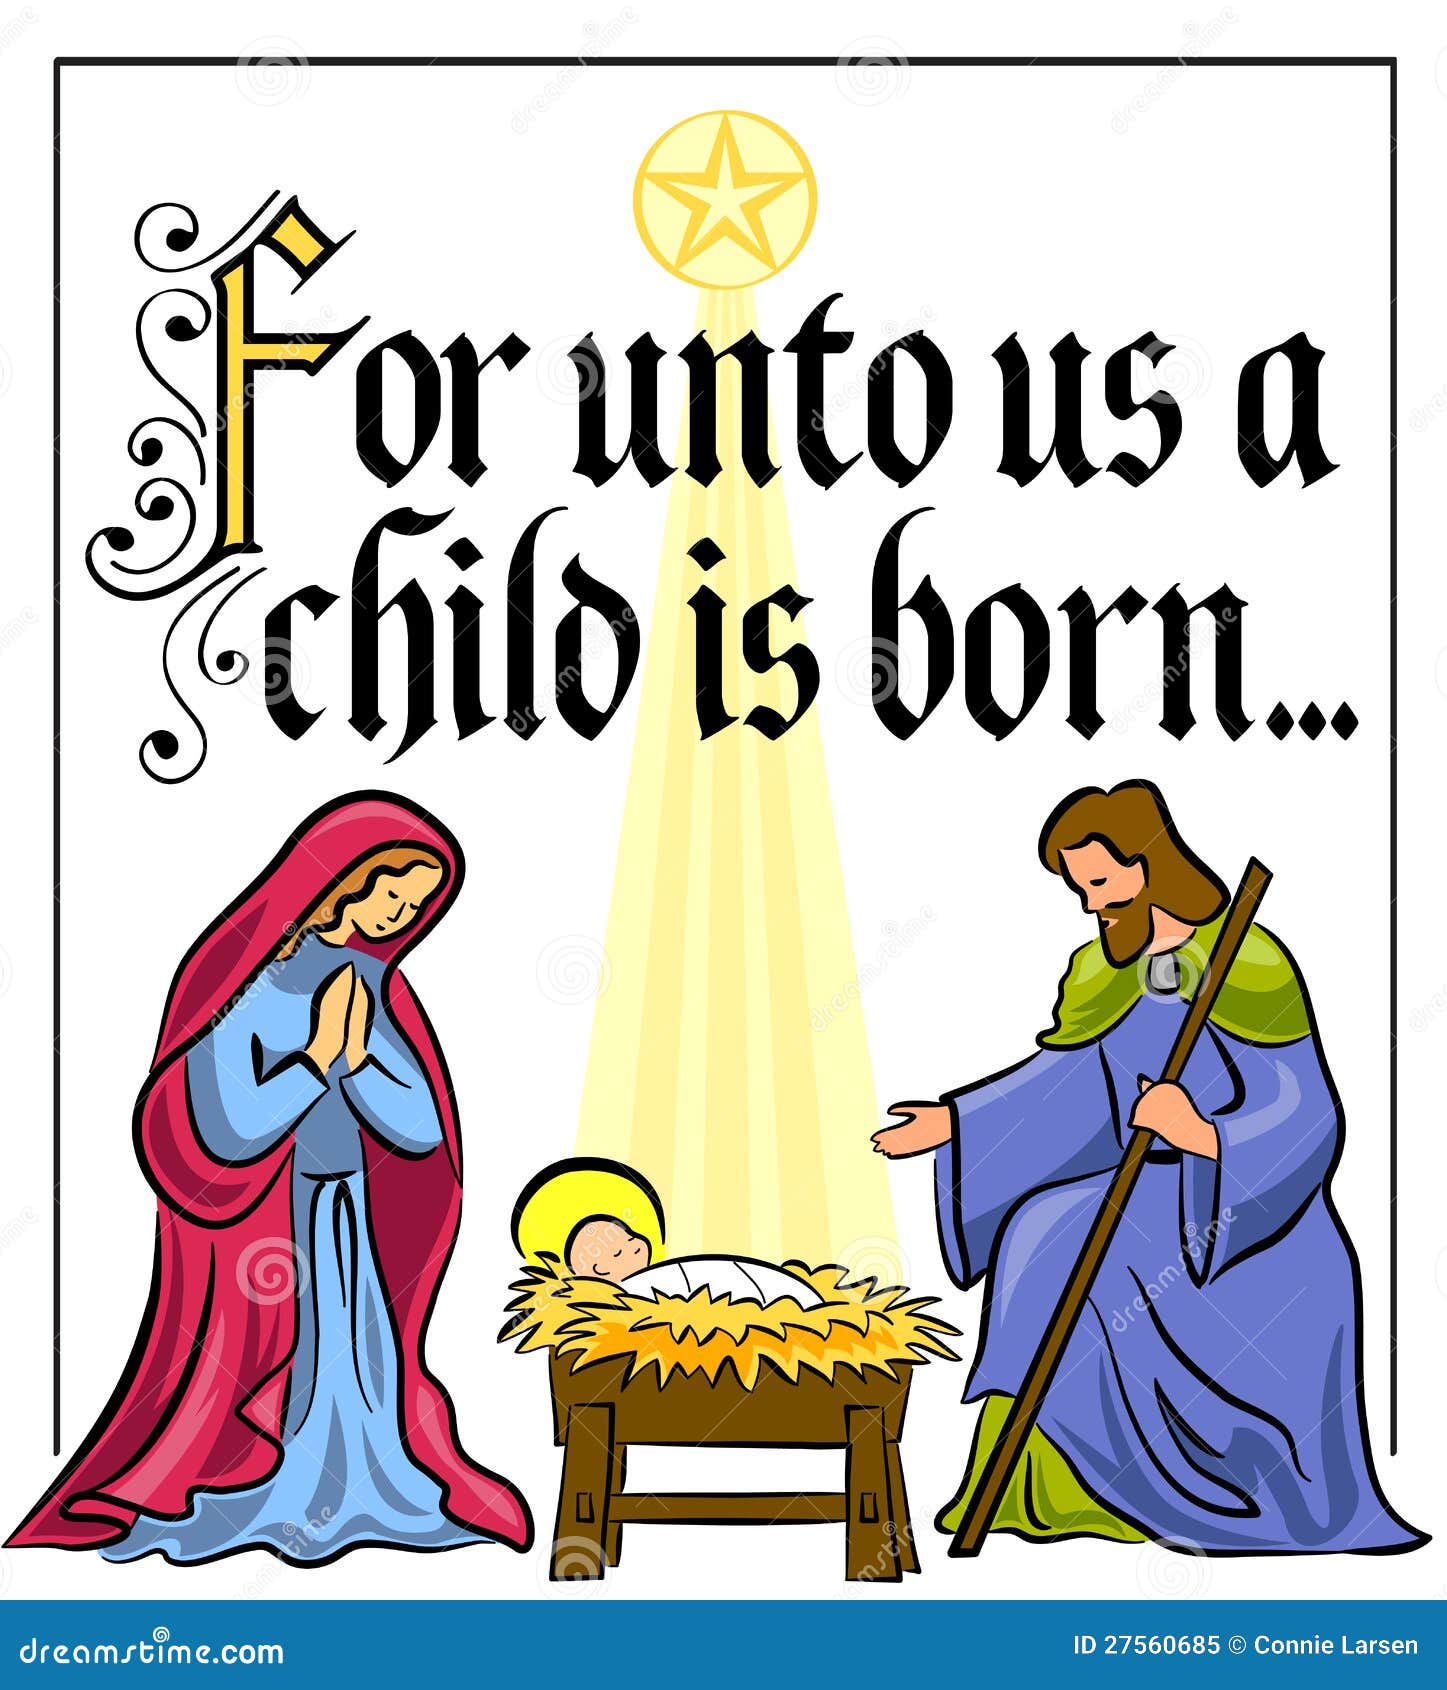 Christmas Nativity Verse eps Illustration of a nativity scene in bright colors with the